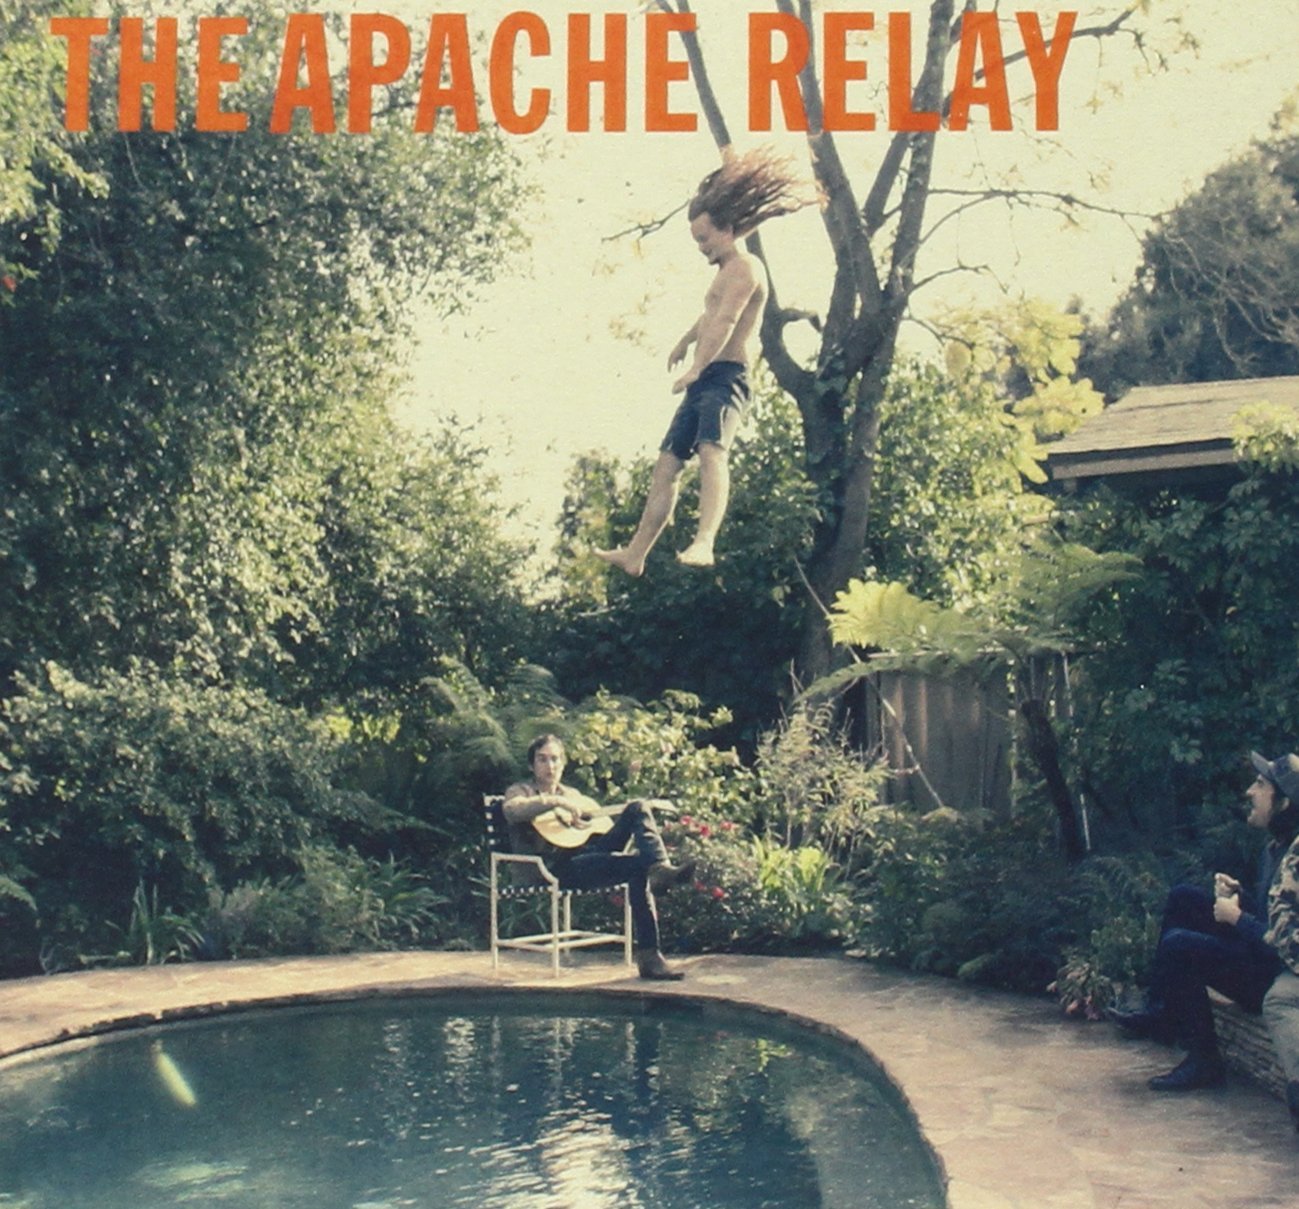 The Apache Relay - The Apache Relay